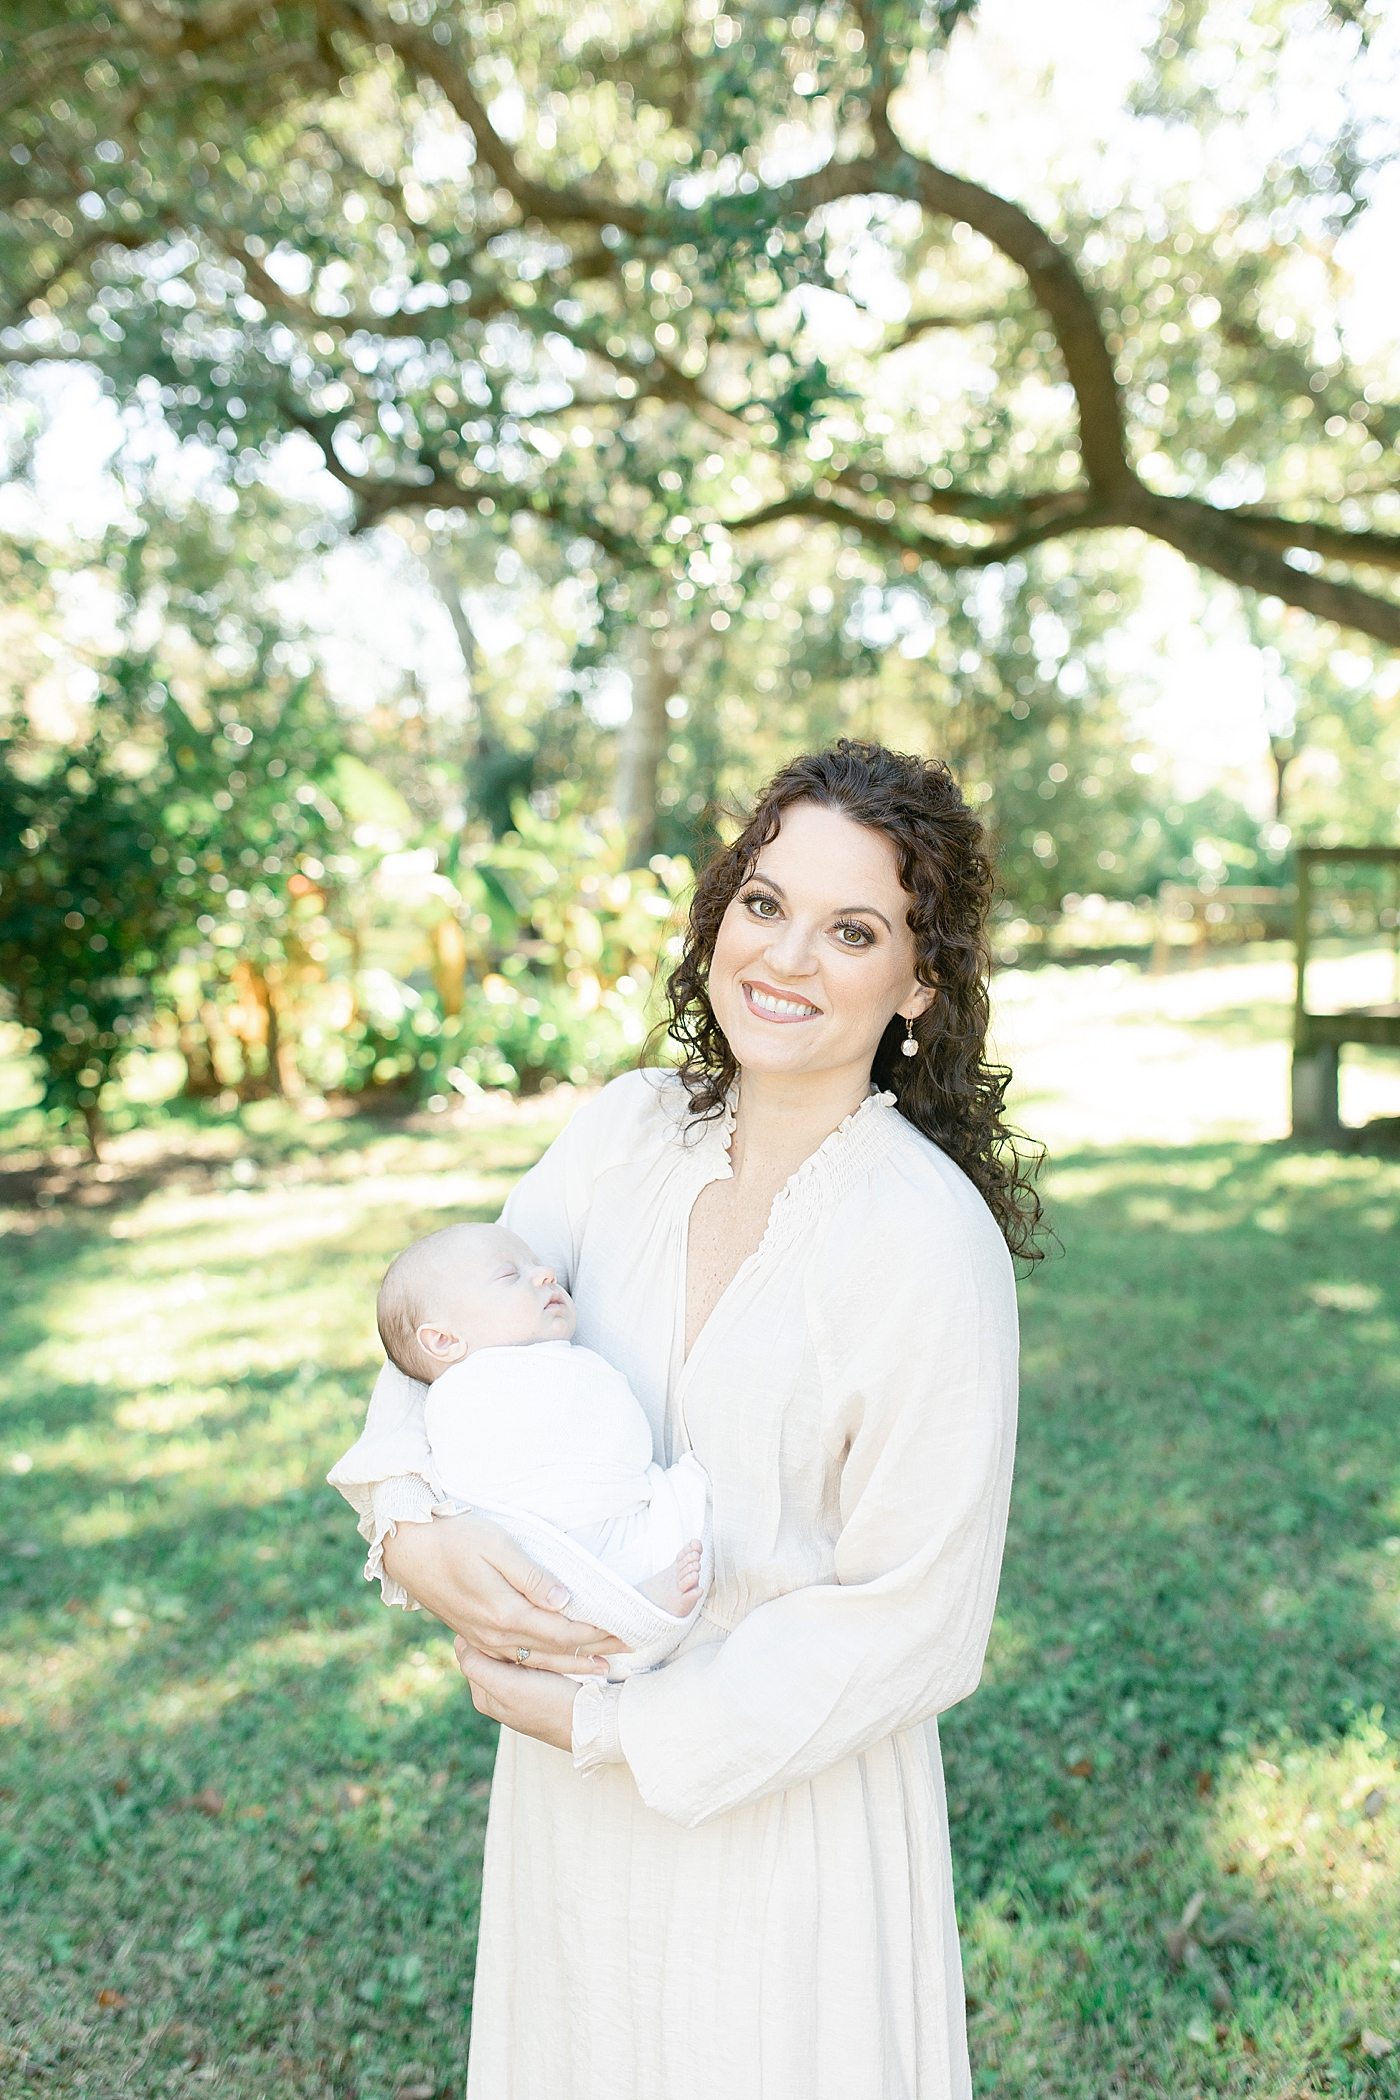 Mom in cream dress smiling holding her new baby | Photo by Little Sunshine Photography